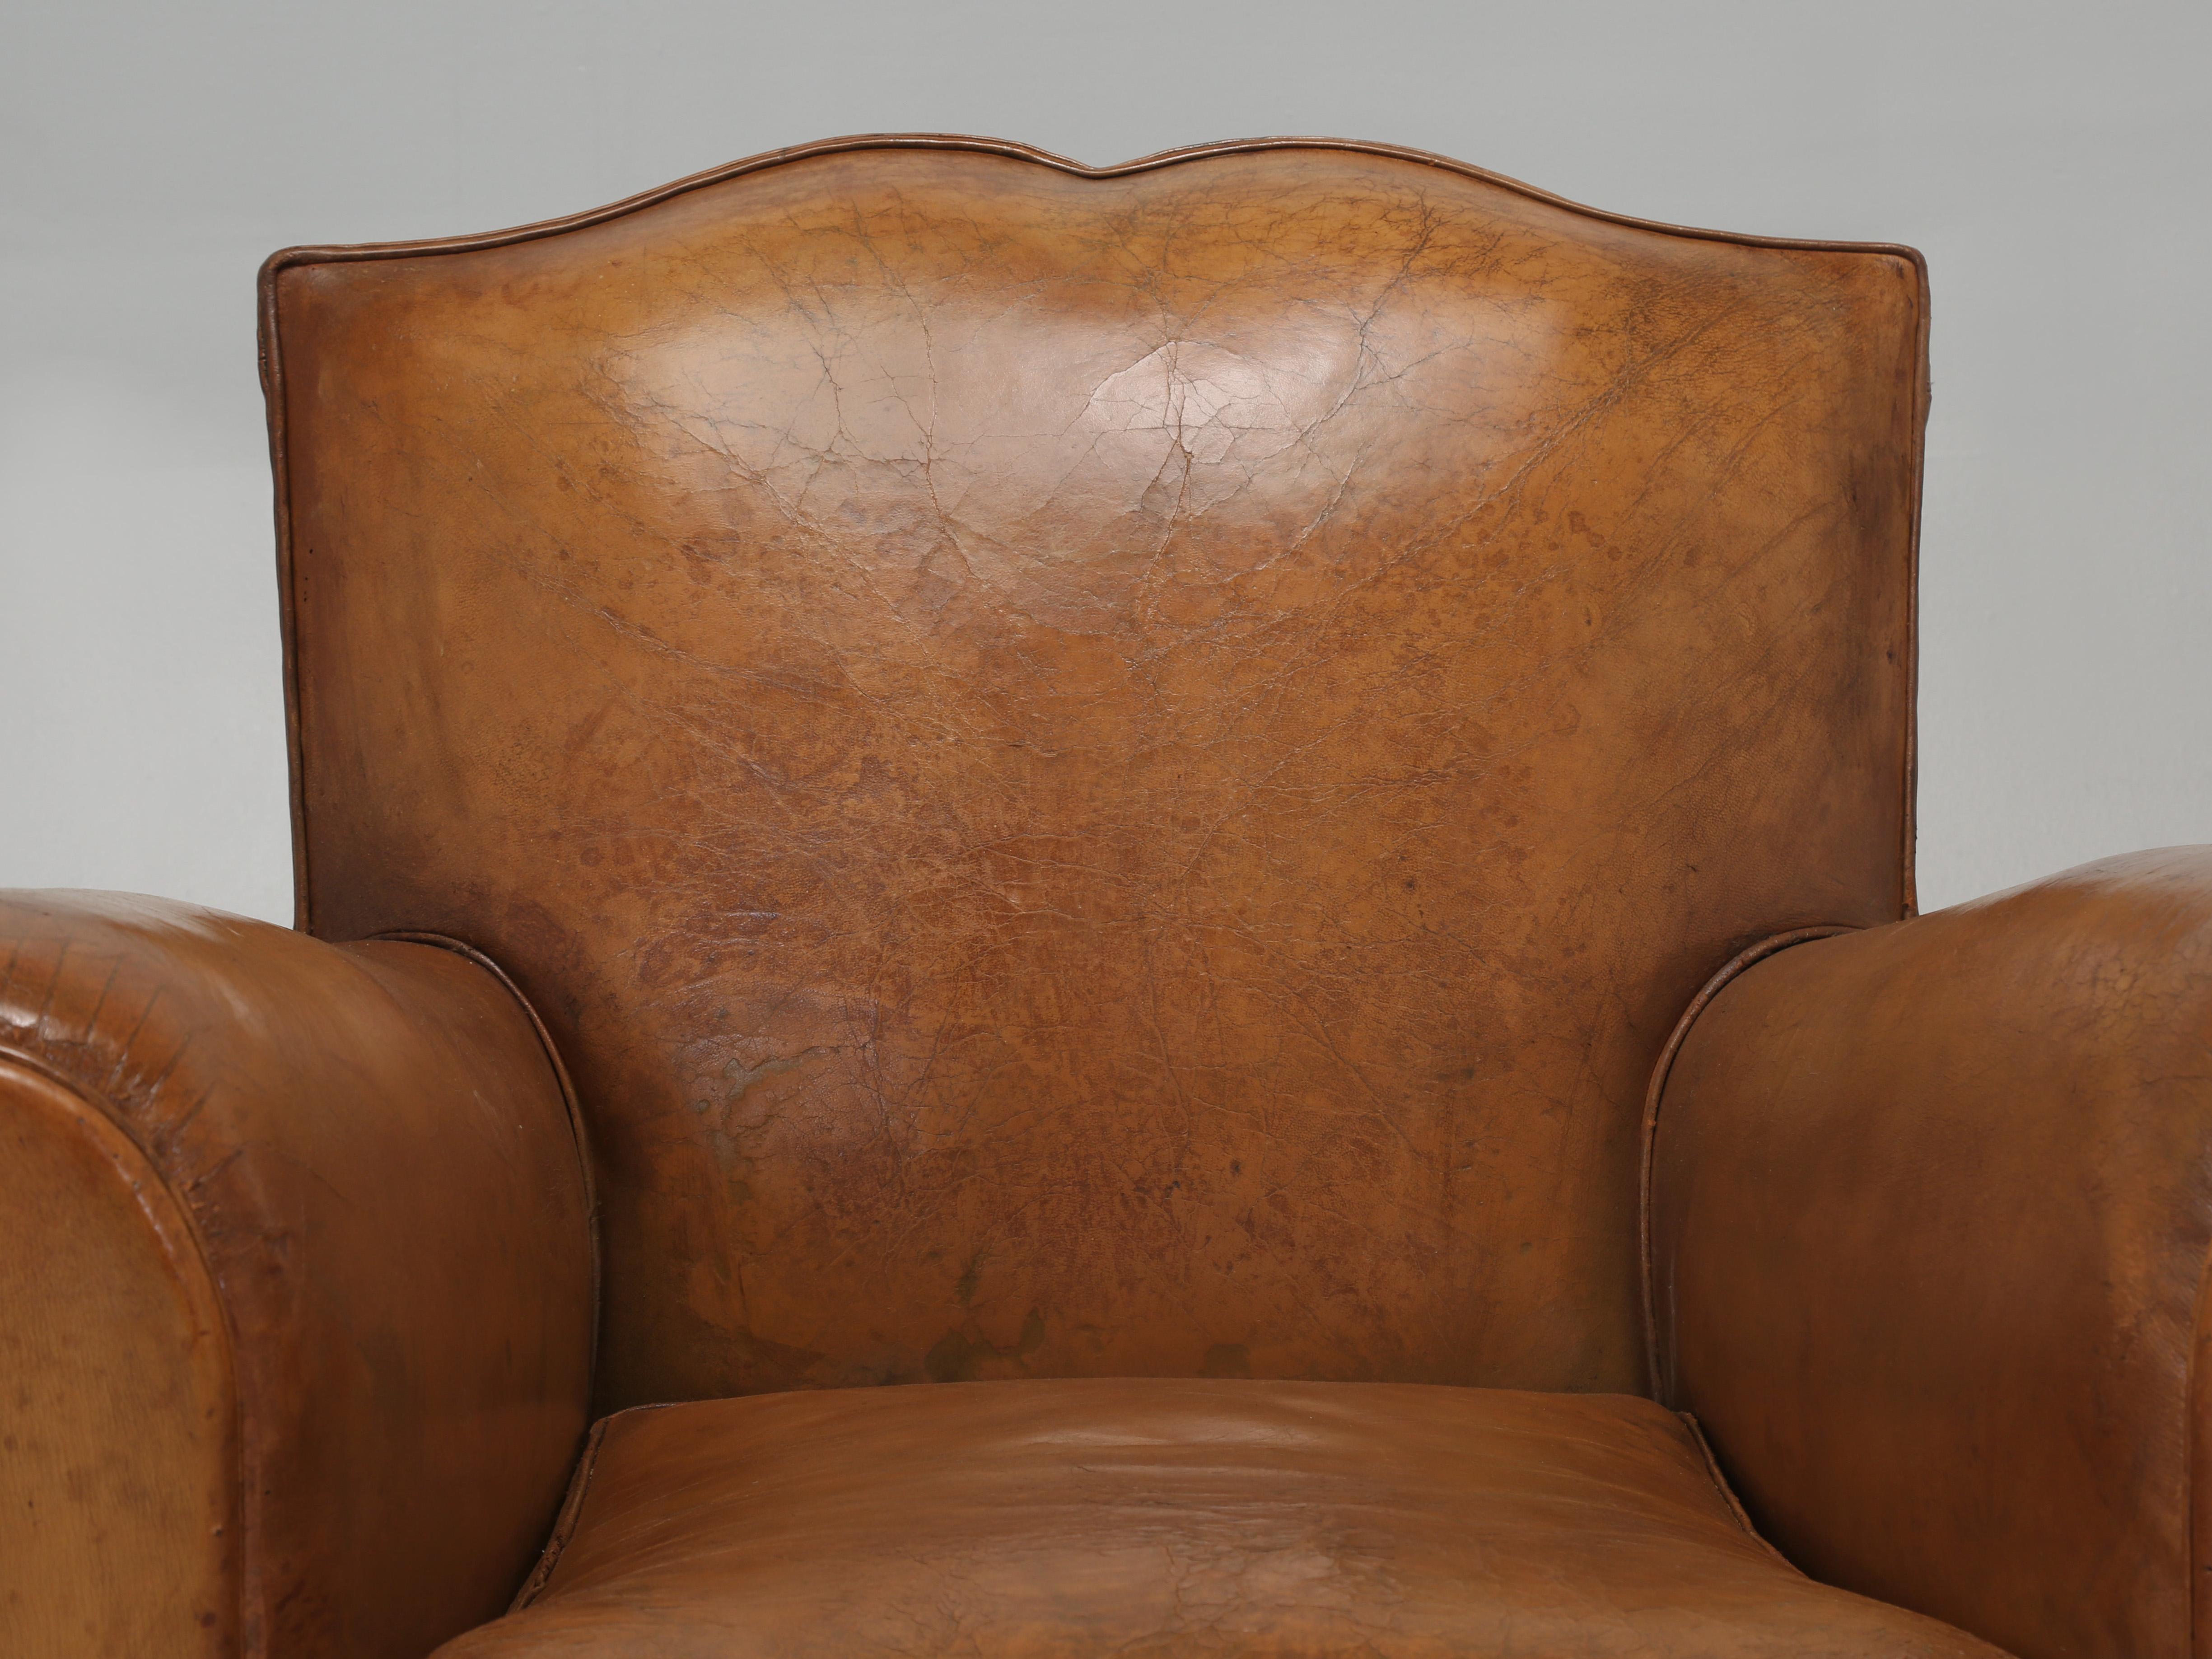 French Leather Club Chair that was internally extensively restored, while keeping the Leather original to the Club Chair. Our Old Plank Upholstery Department has been restoring French Leather Club Chairs for over 30-years. Our Old Plank Workshop